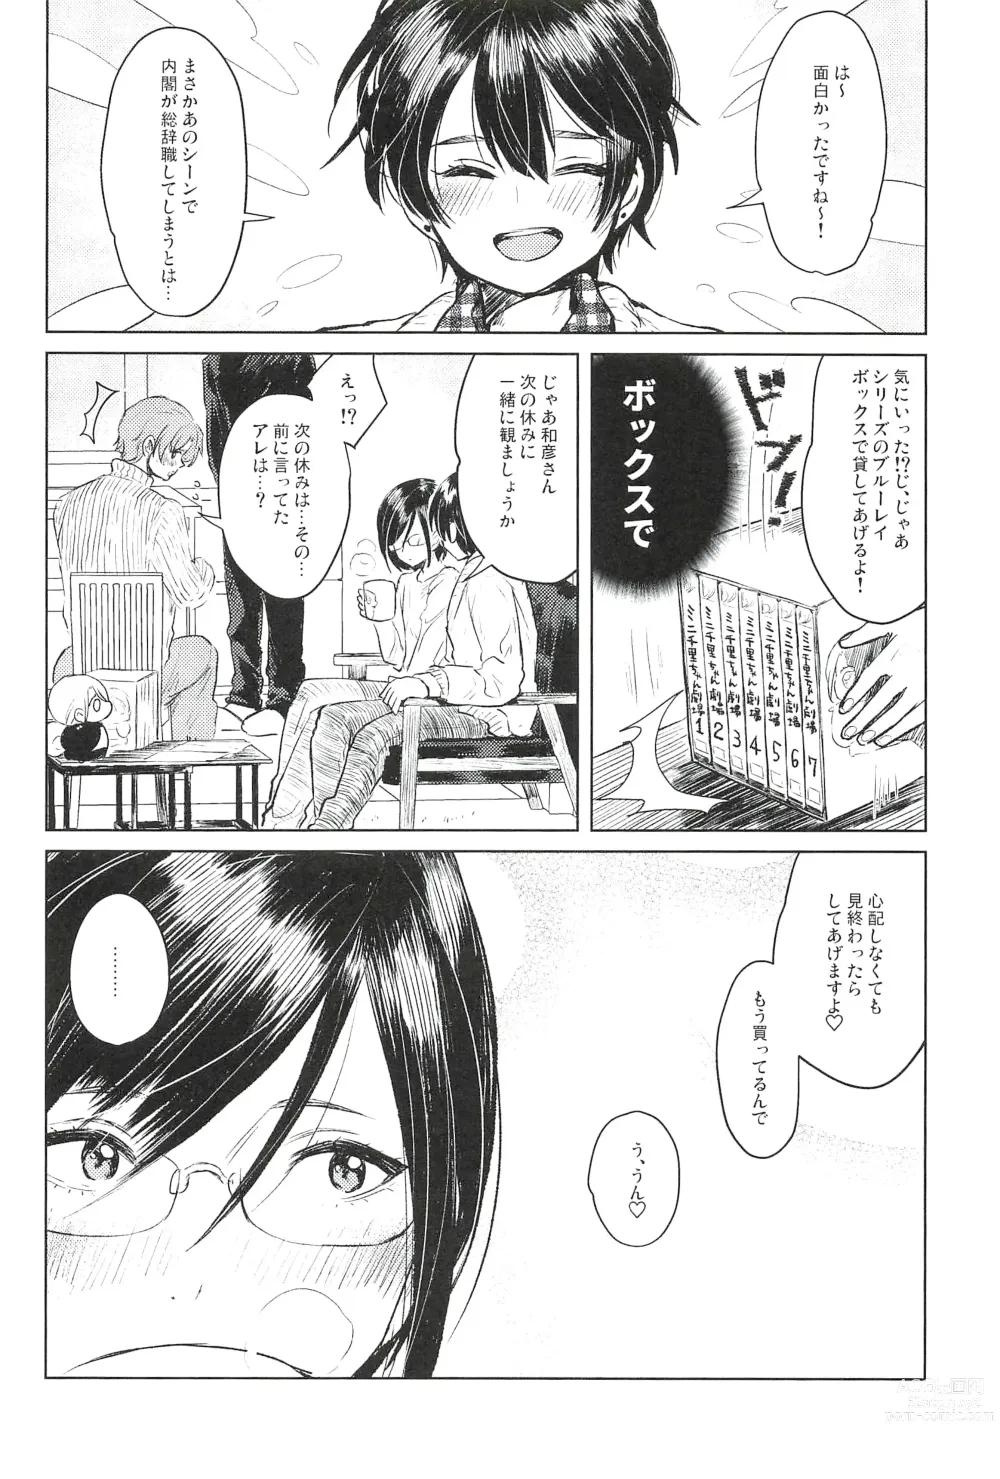 Page 6 of doujinshi ONE MORE 4P